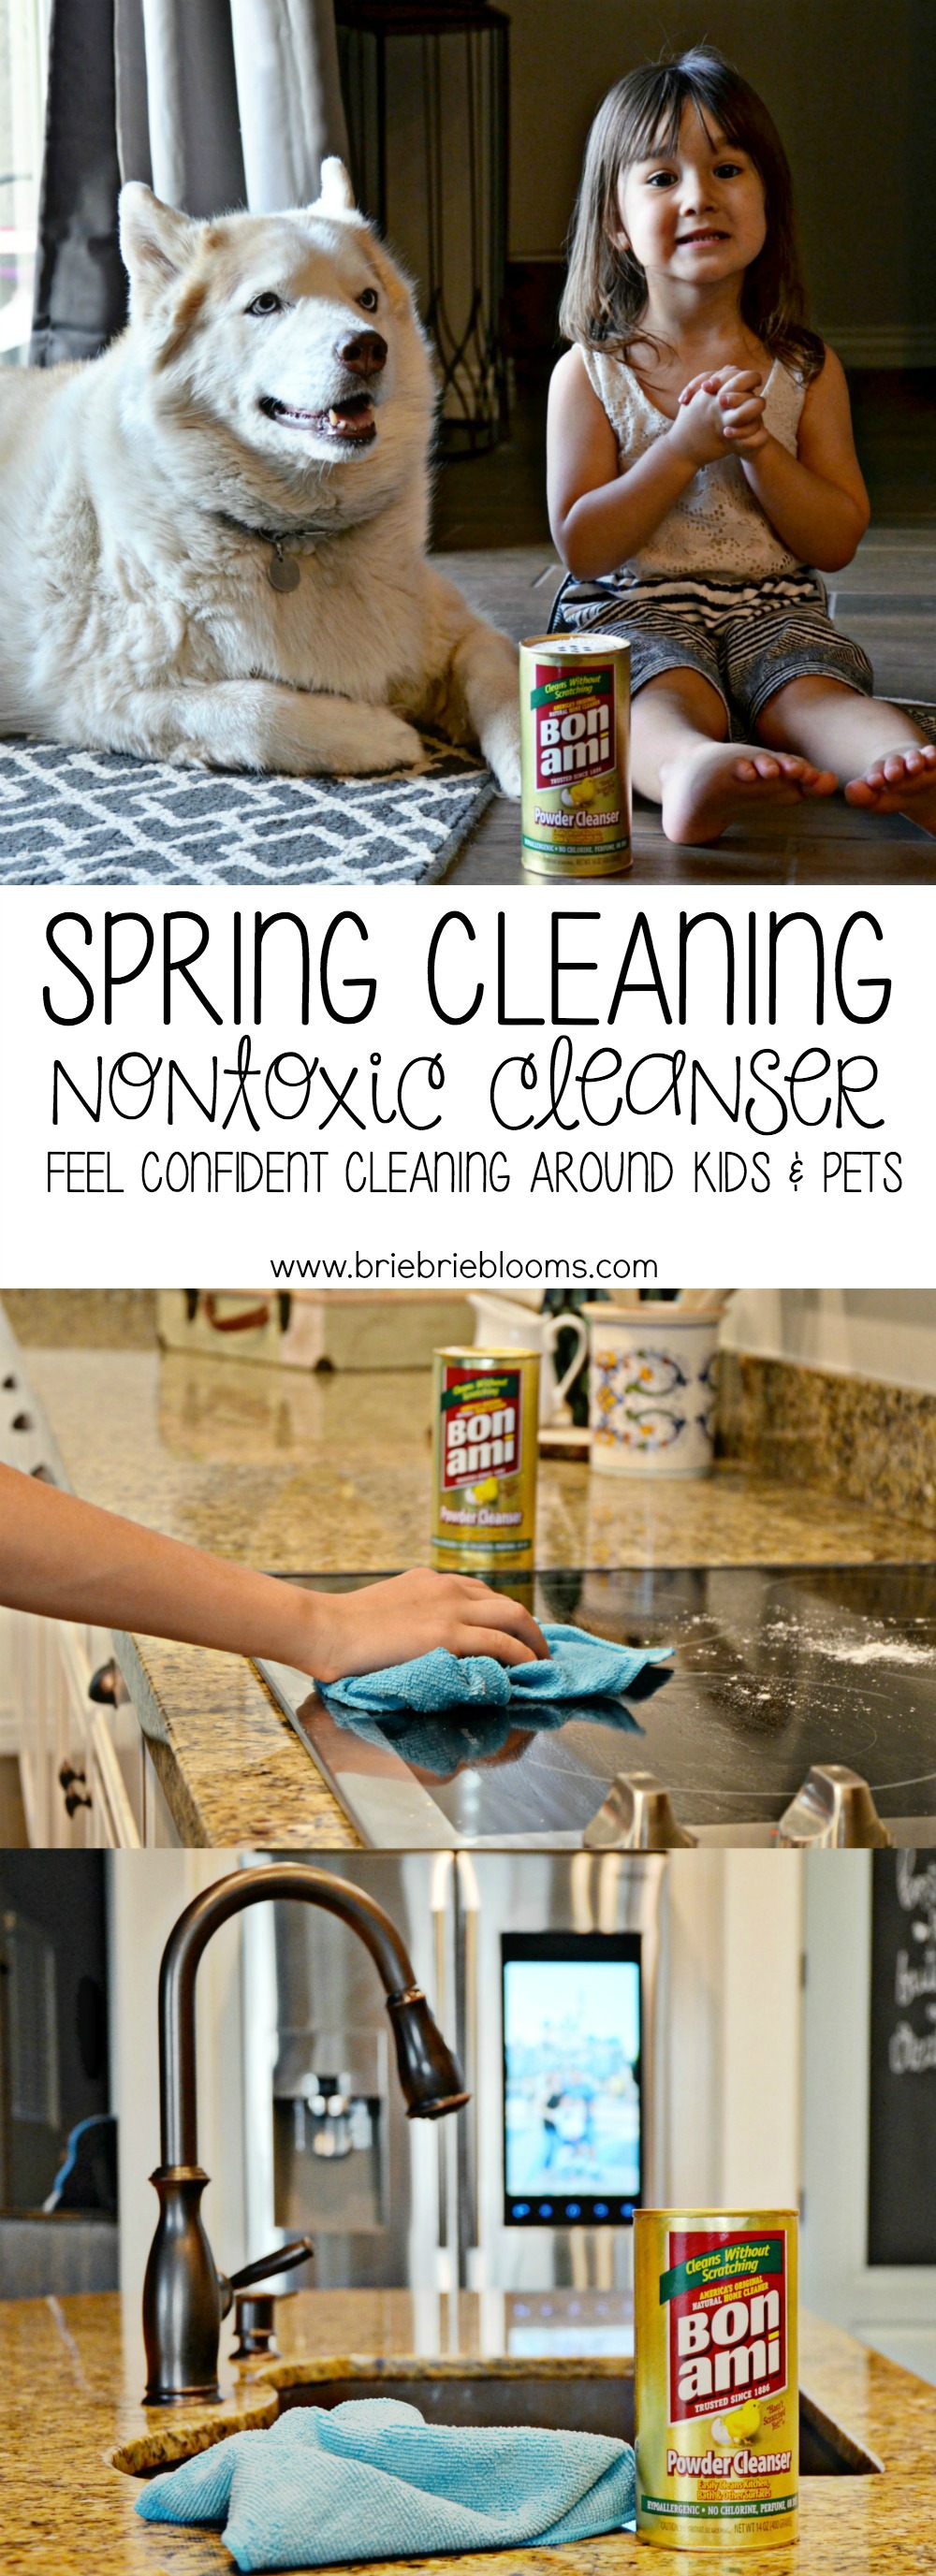 Feel confident cleaning around kids and pets with Bon Ami nontoxic cleanser.